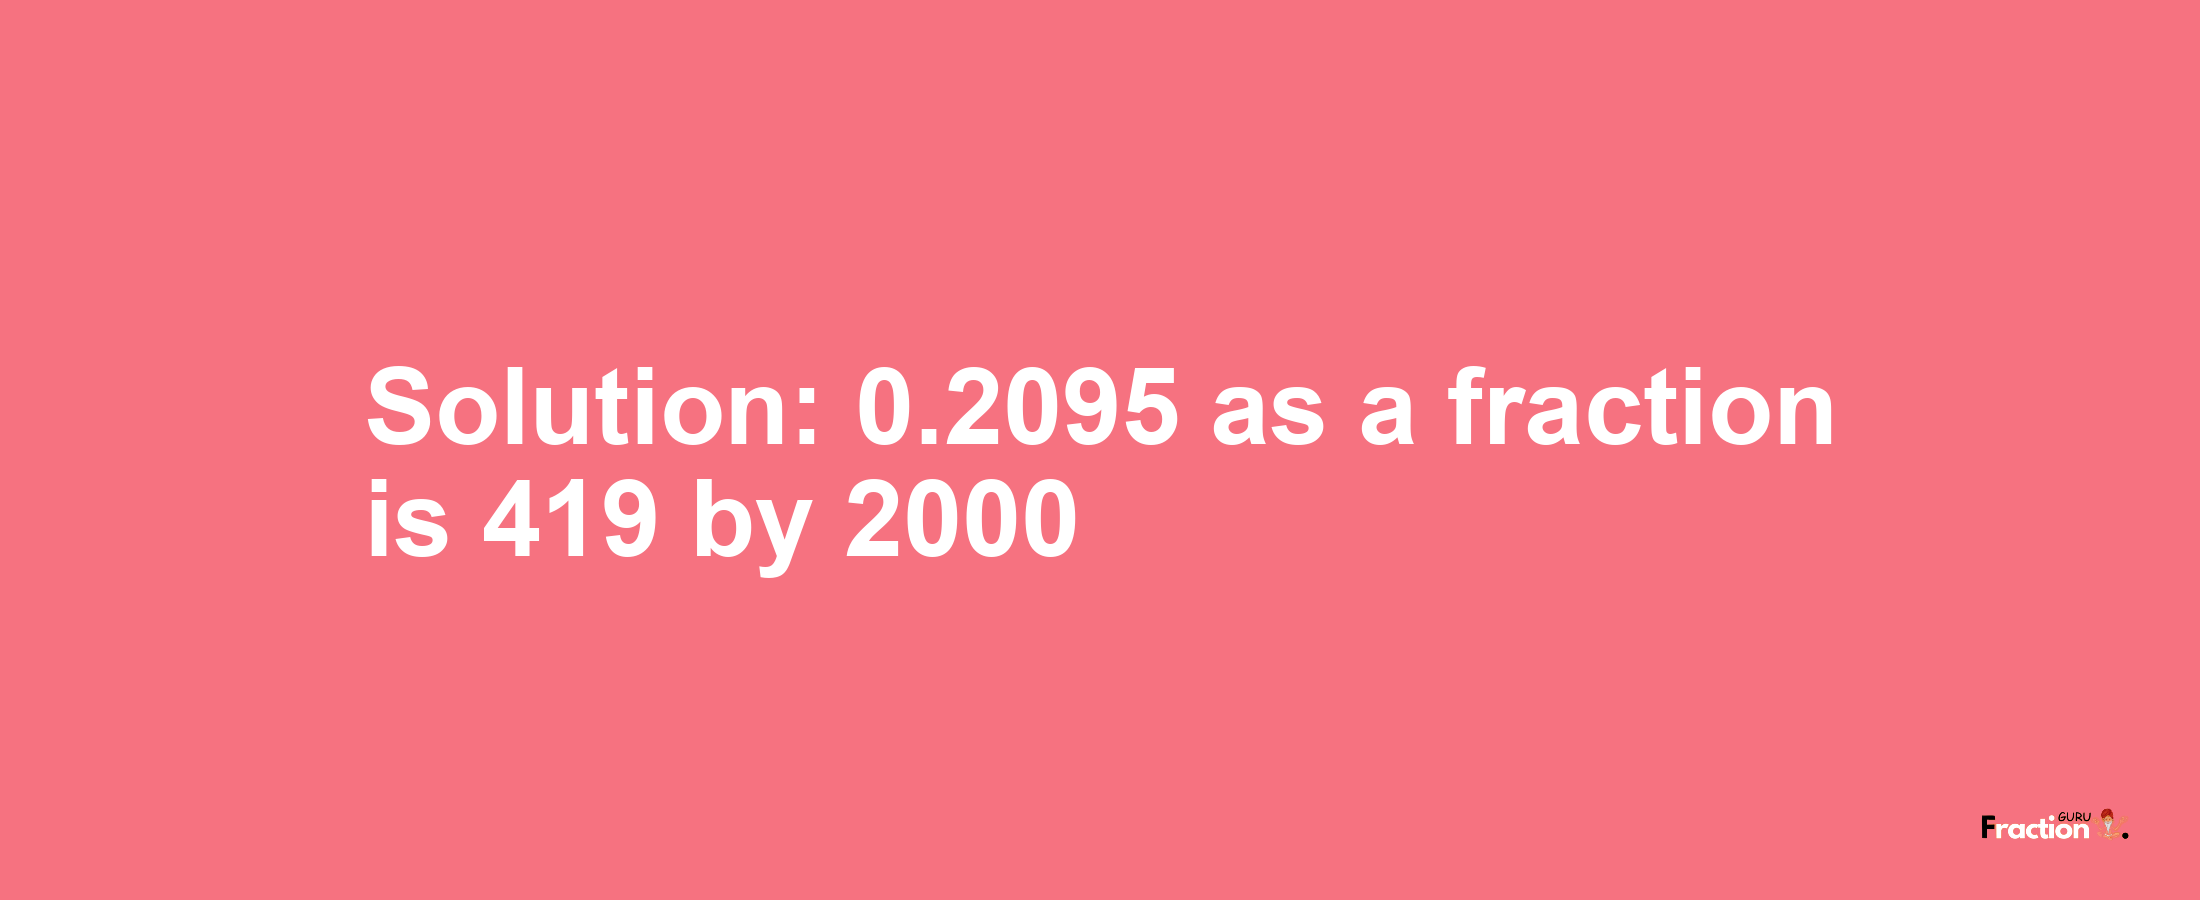 Solution:0.2095 as a fraction is 419/2000